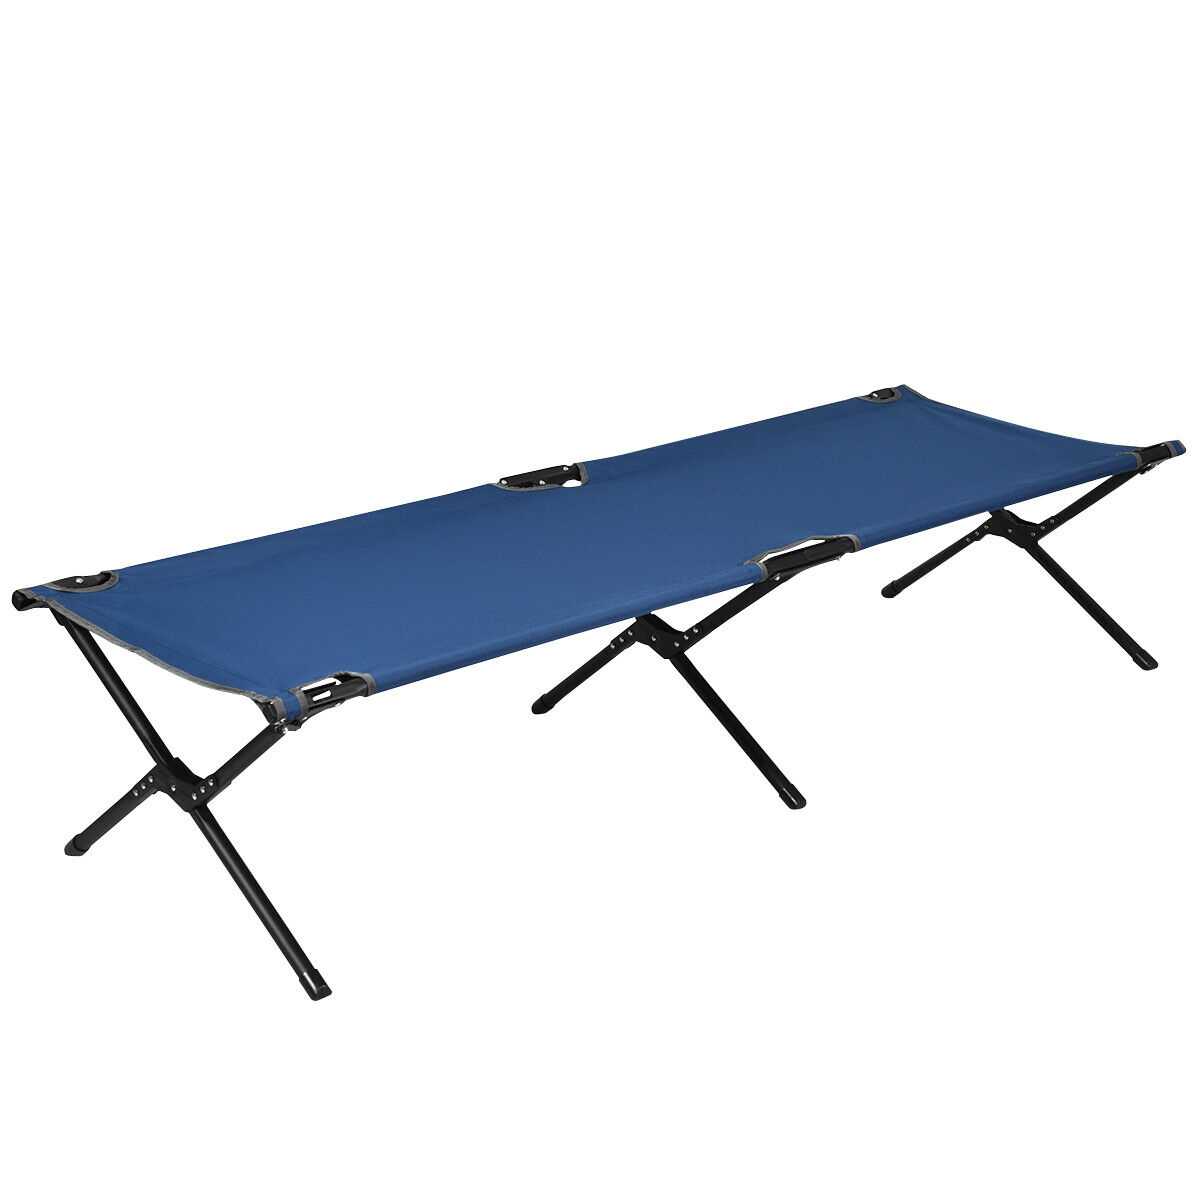 Folding Camping Cot & Bed Heavy-Duty For Adults Kids W/ Carrying Bag 300LBS Blue